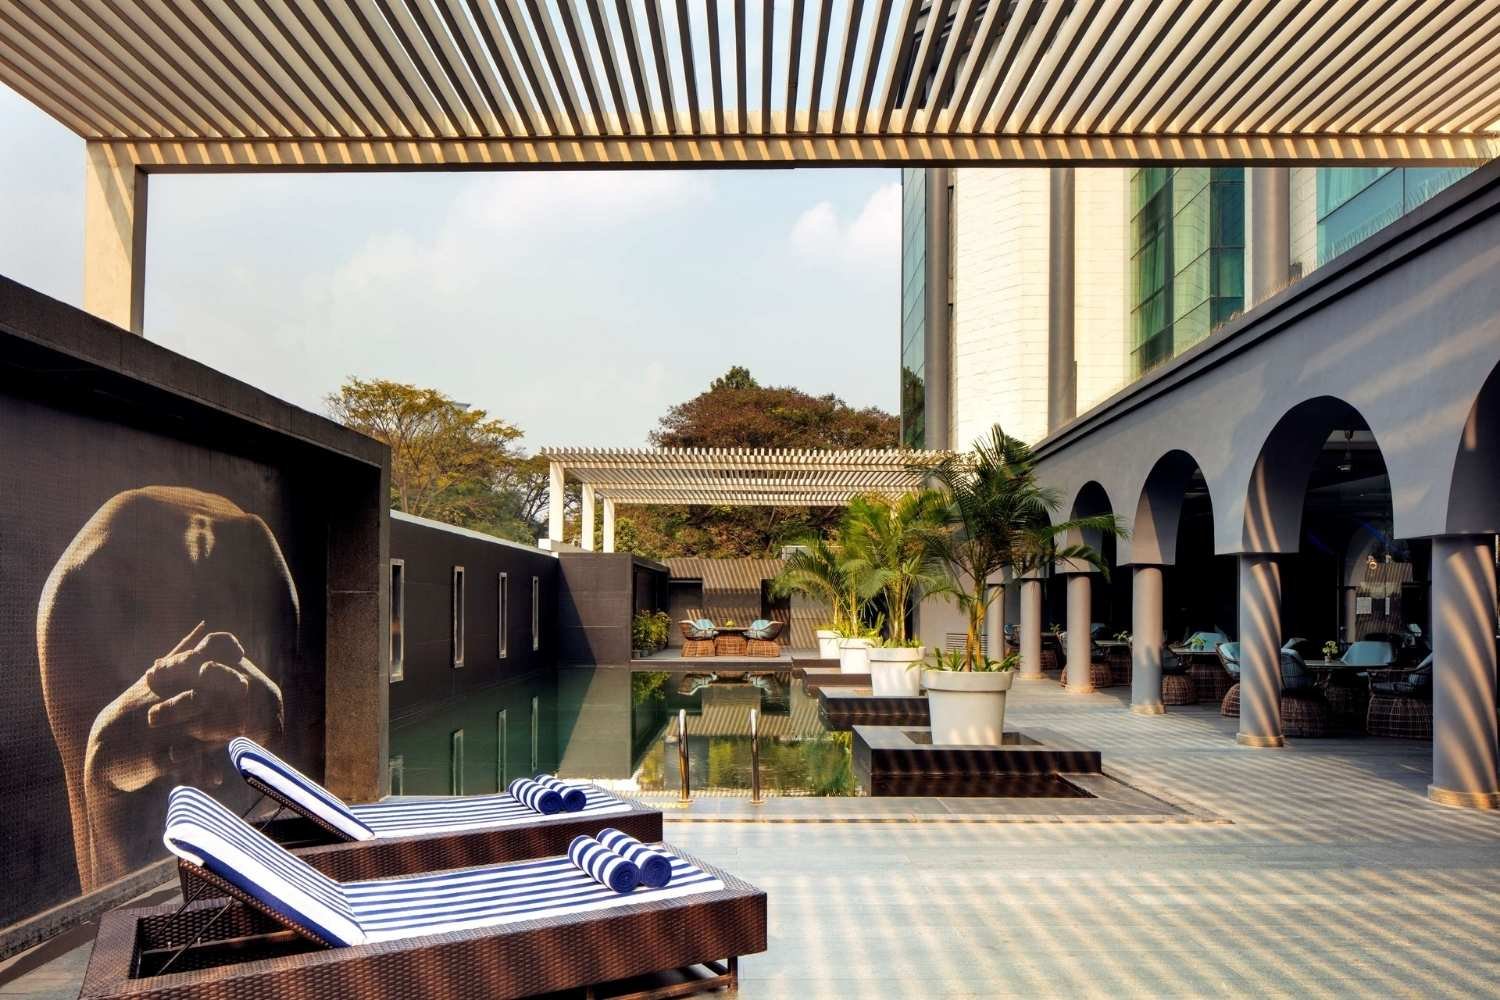 Lounging facilities at Radisson Blu Atria to unwind and relax